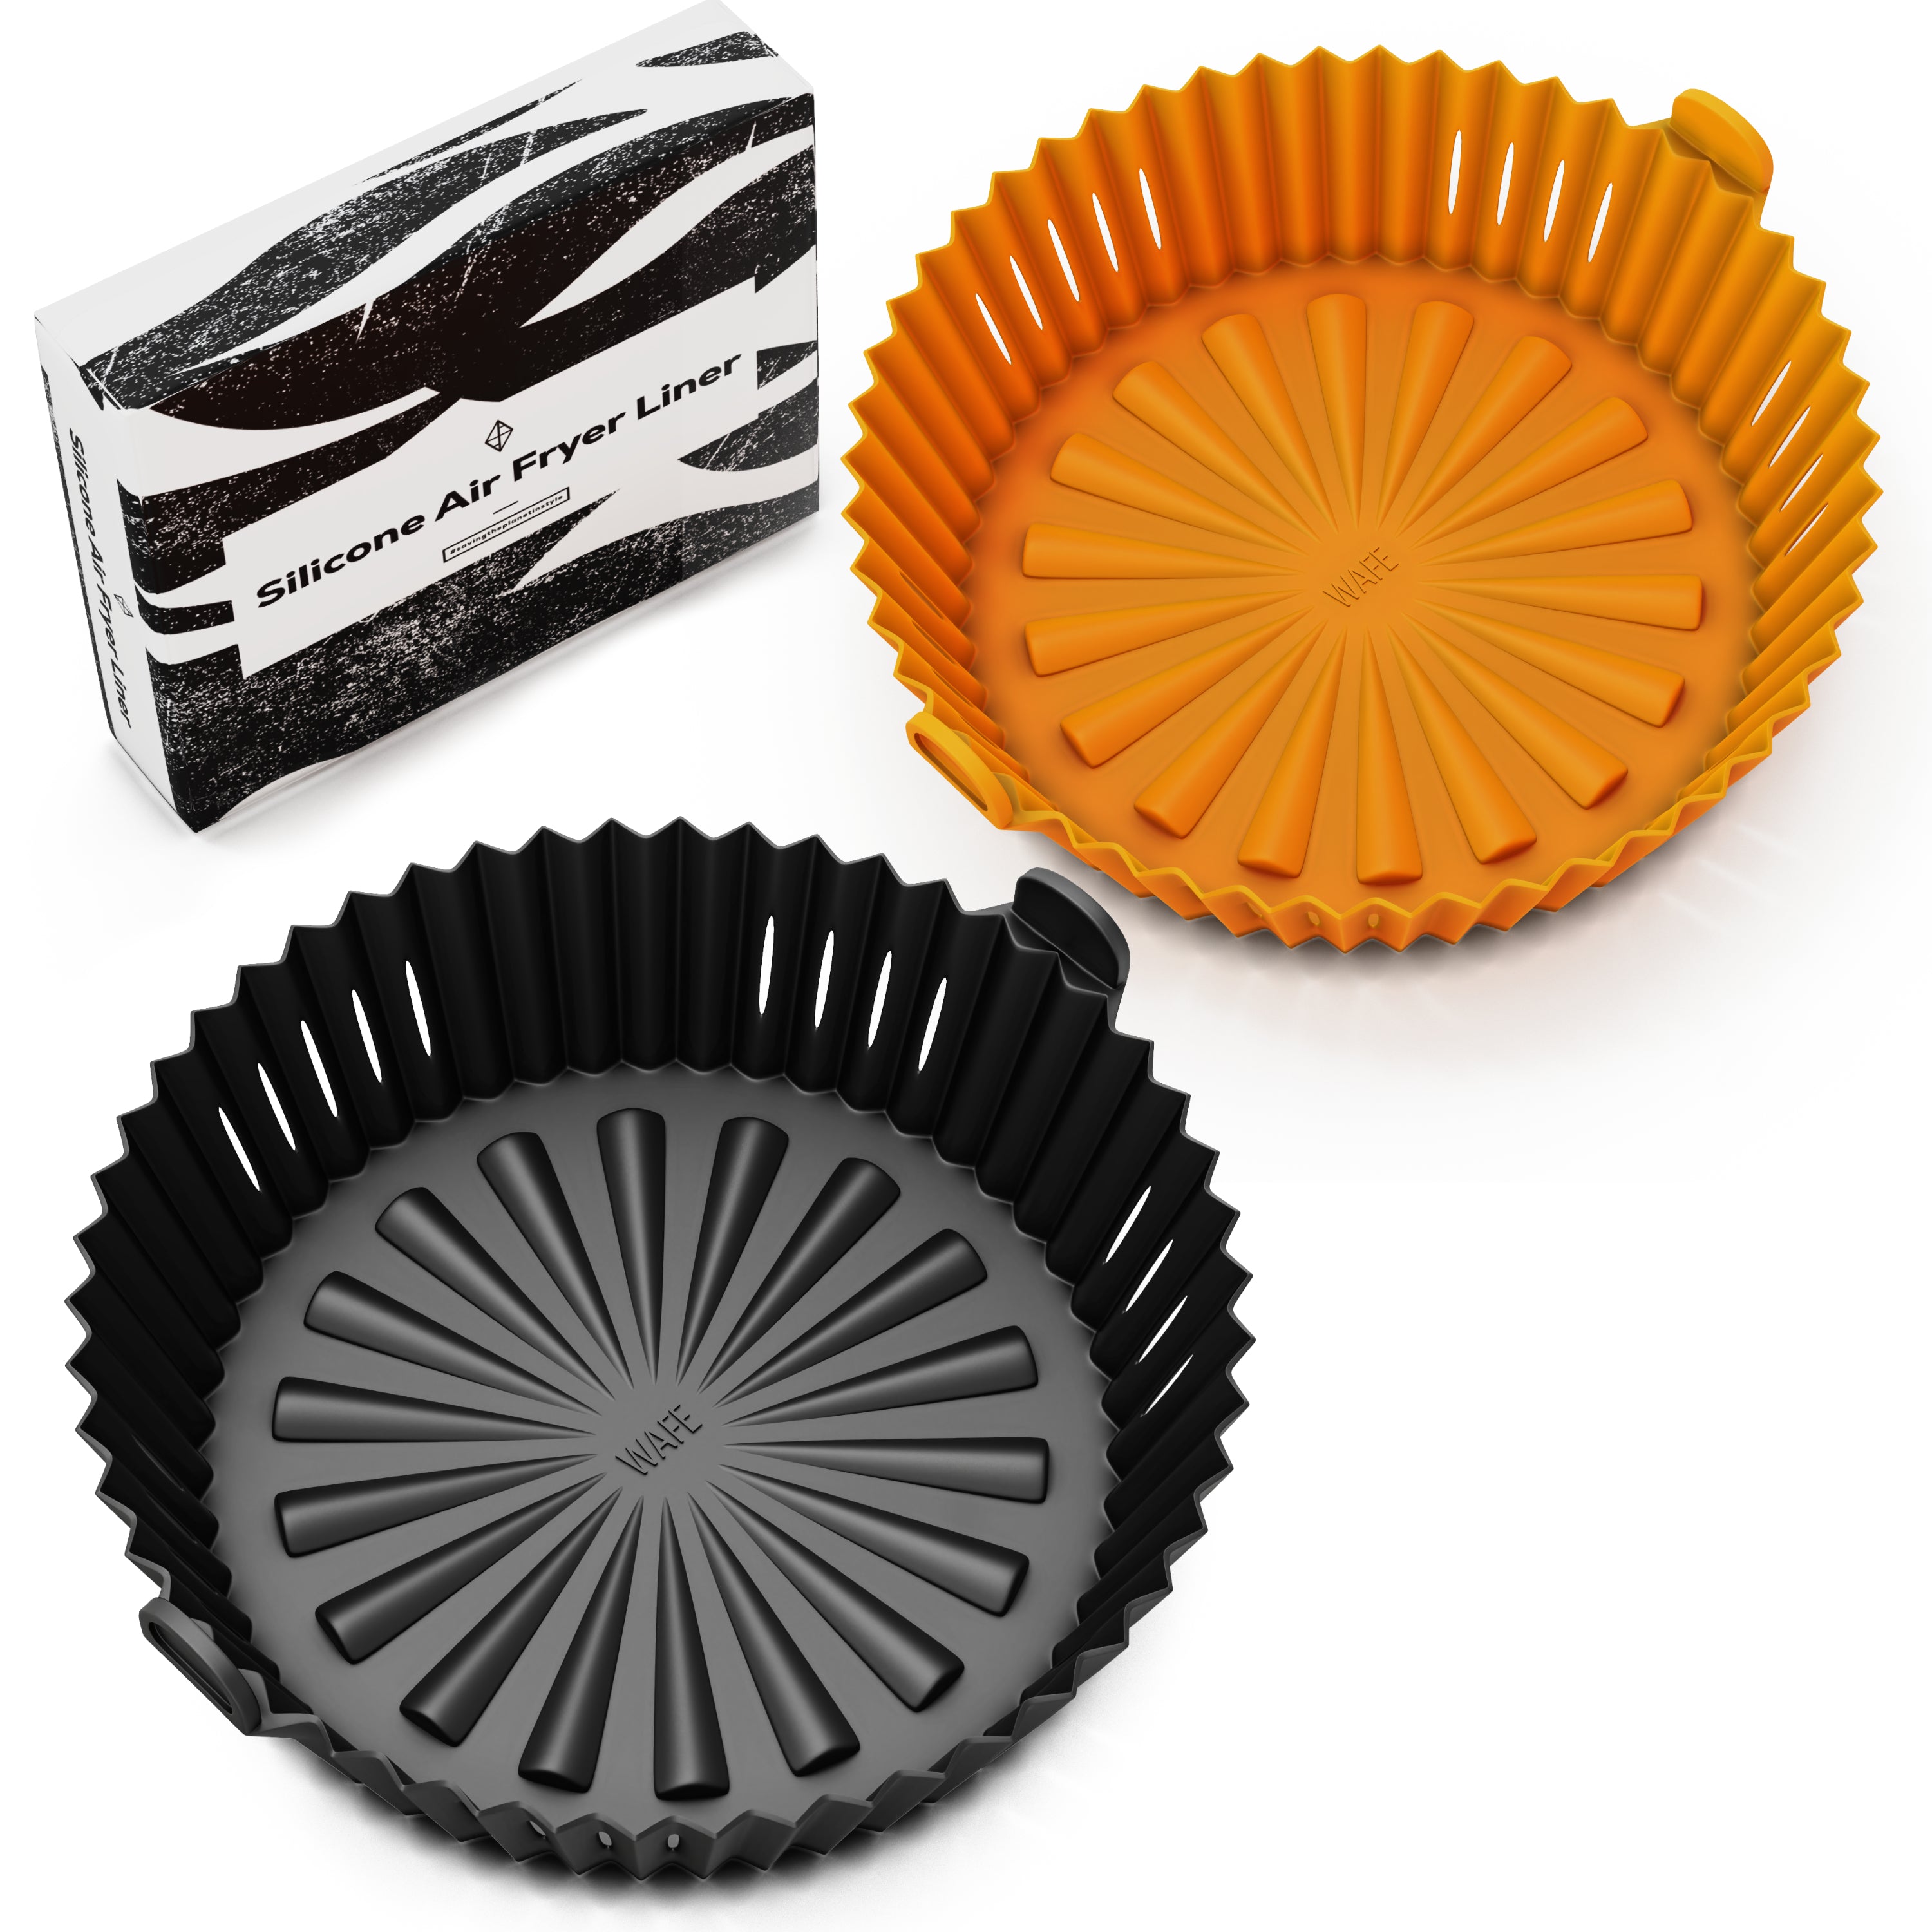 Silicone air fryer liner from Wavelu 